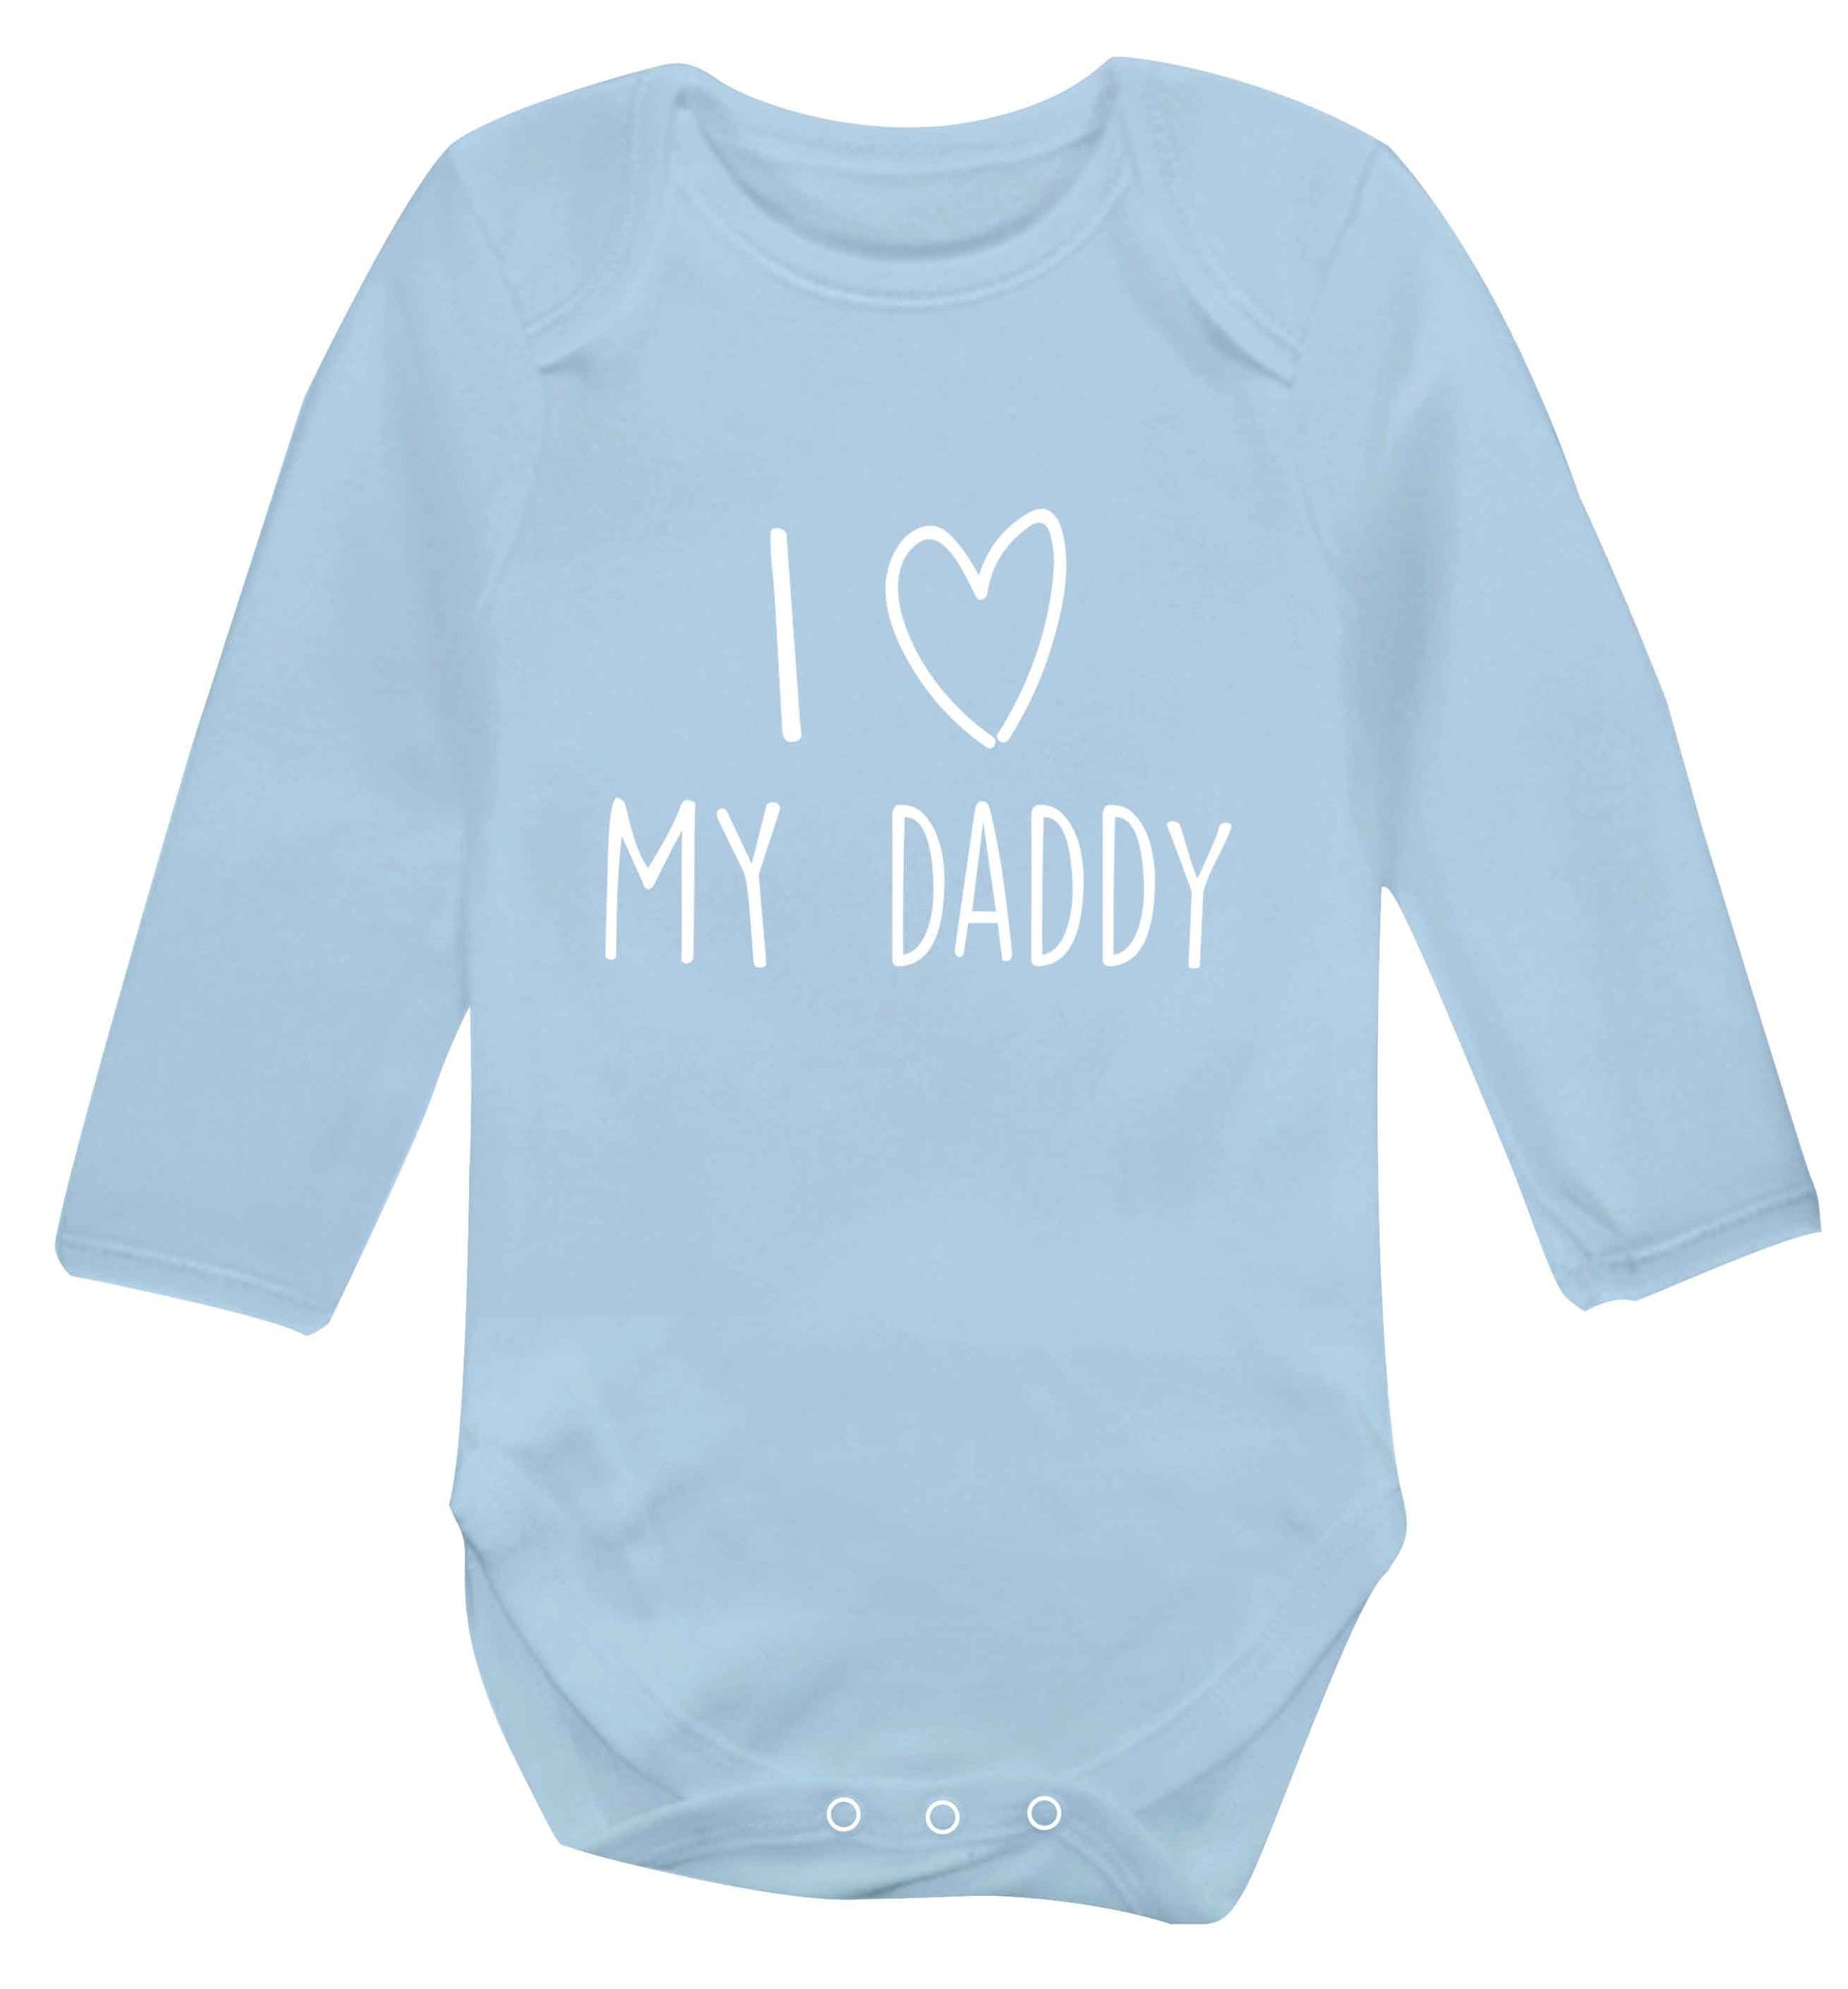 I love my daddy baby vest long sleeved pale blue 6-12 months